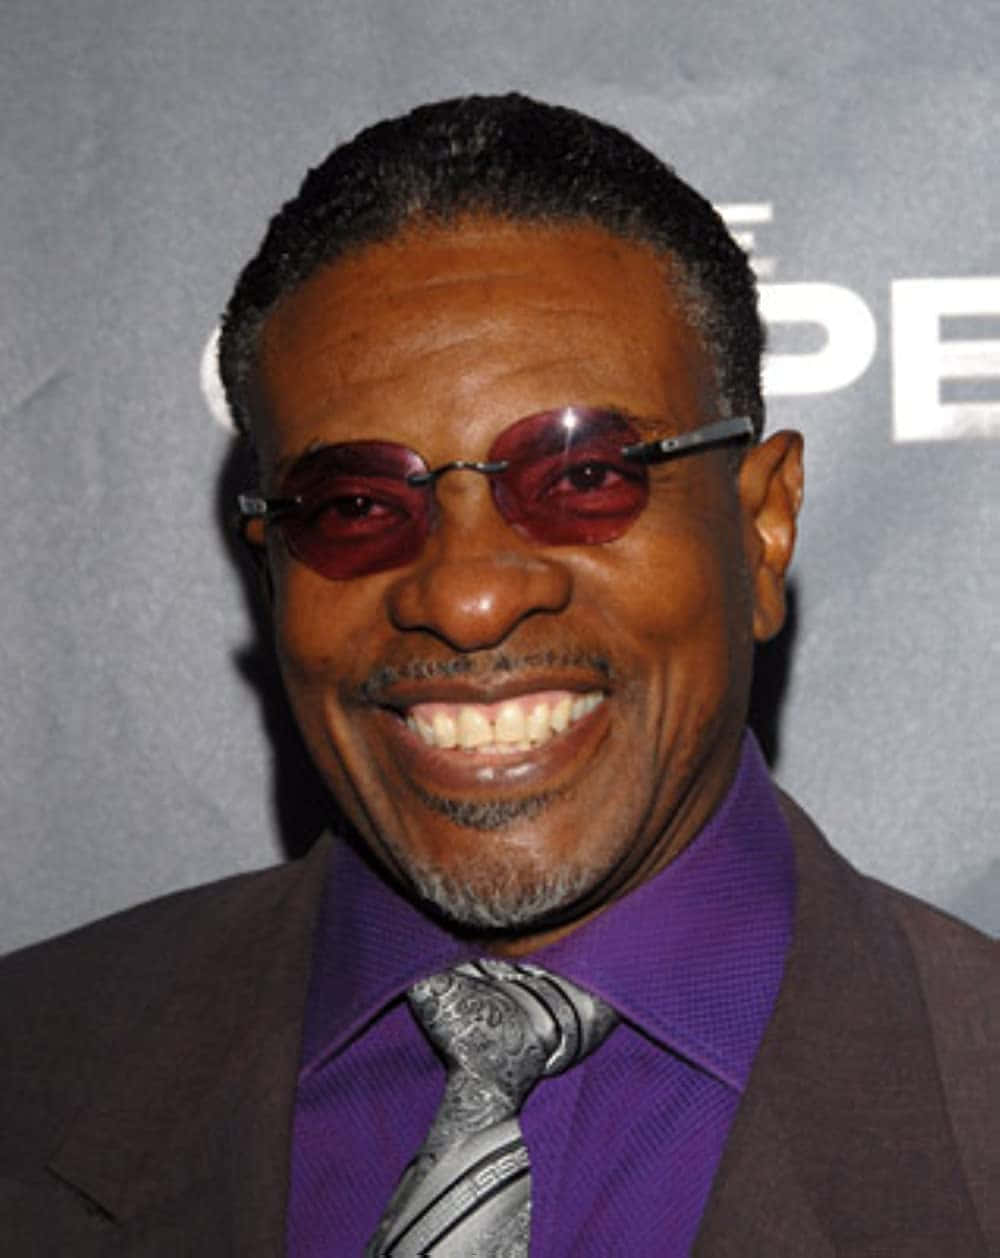 Actor Keith David's Iconic Smile Wallpaper